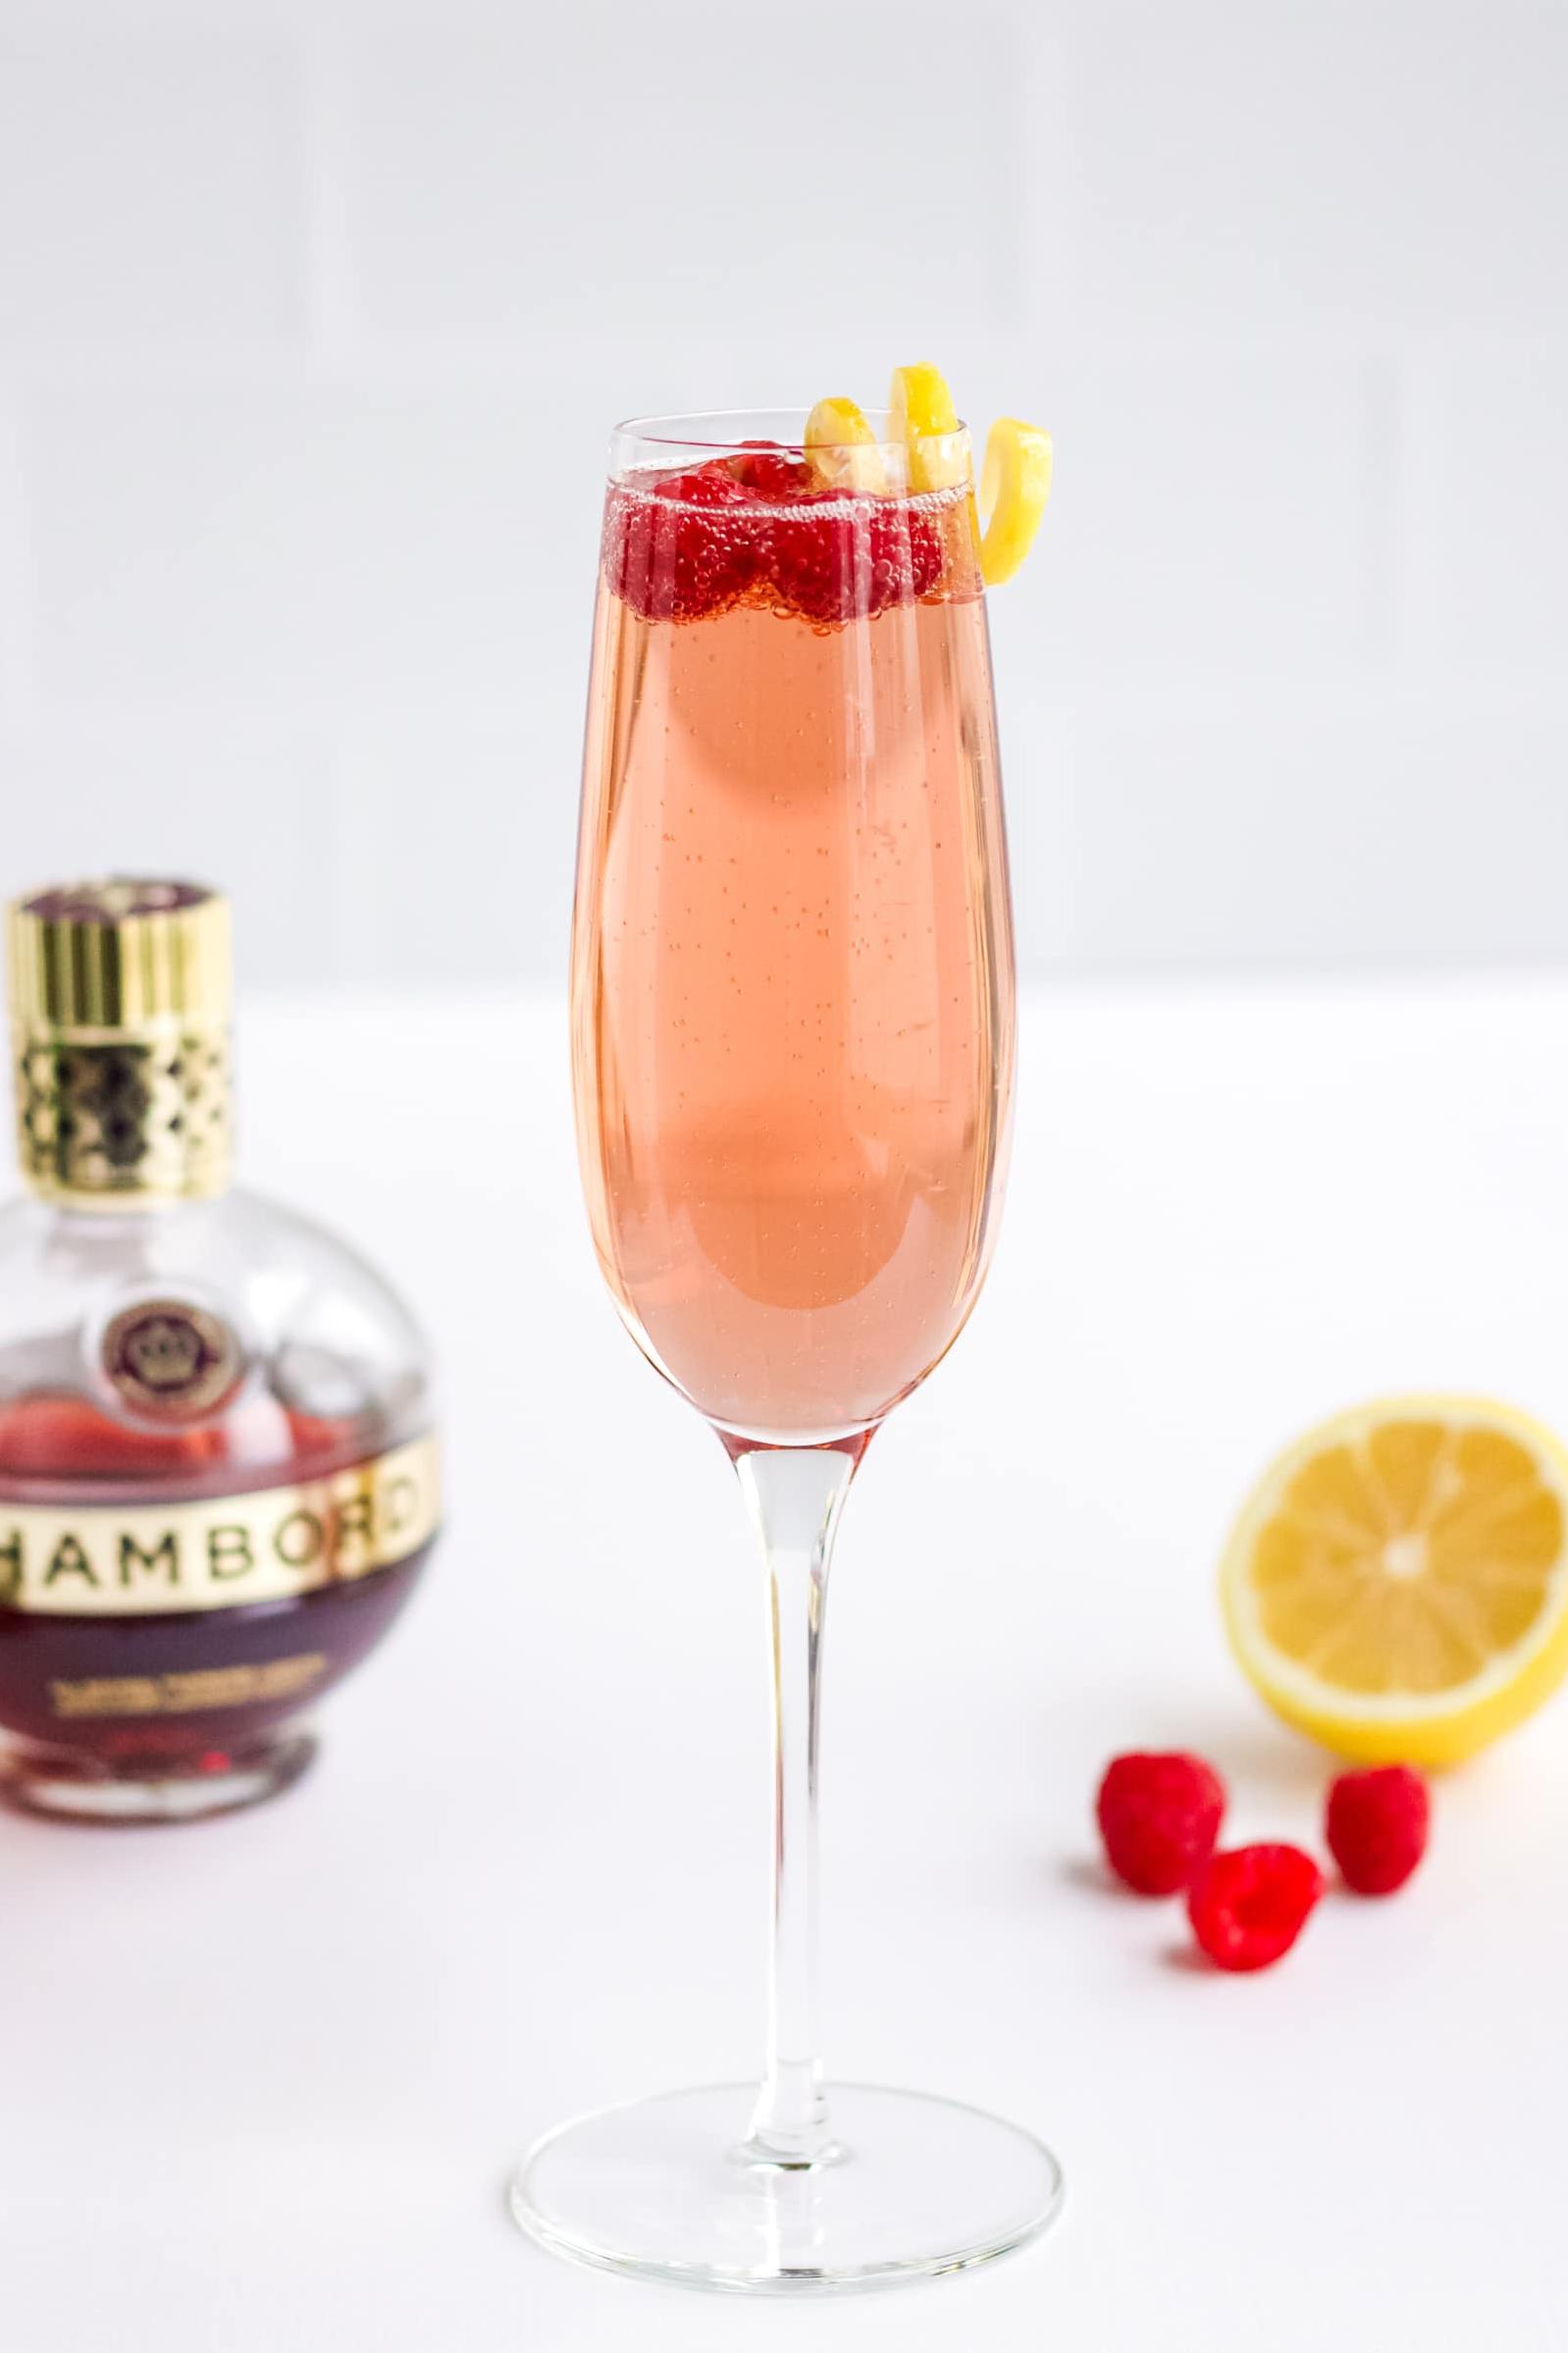  Celebrate the evening in style with these raspberry and Chambord cocktail.